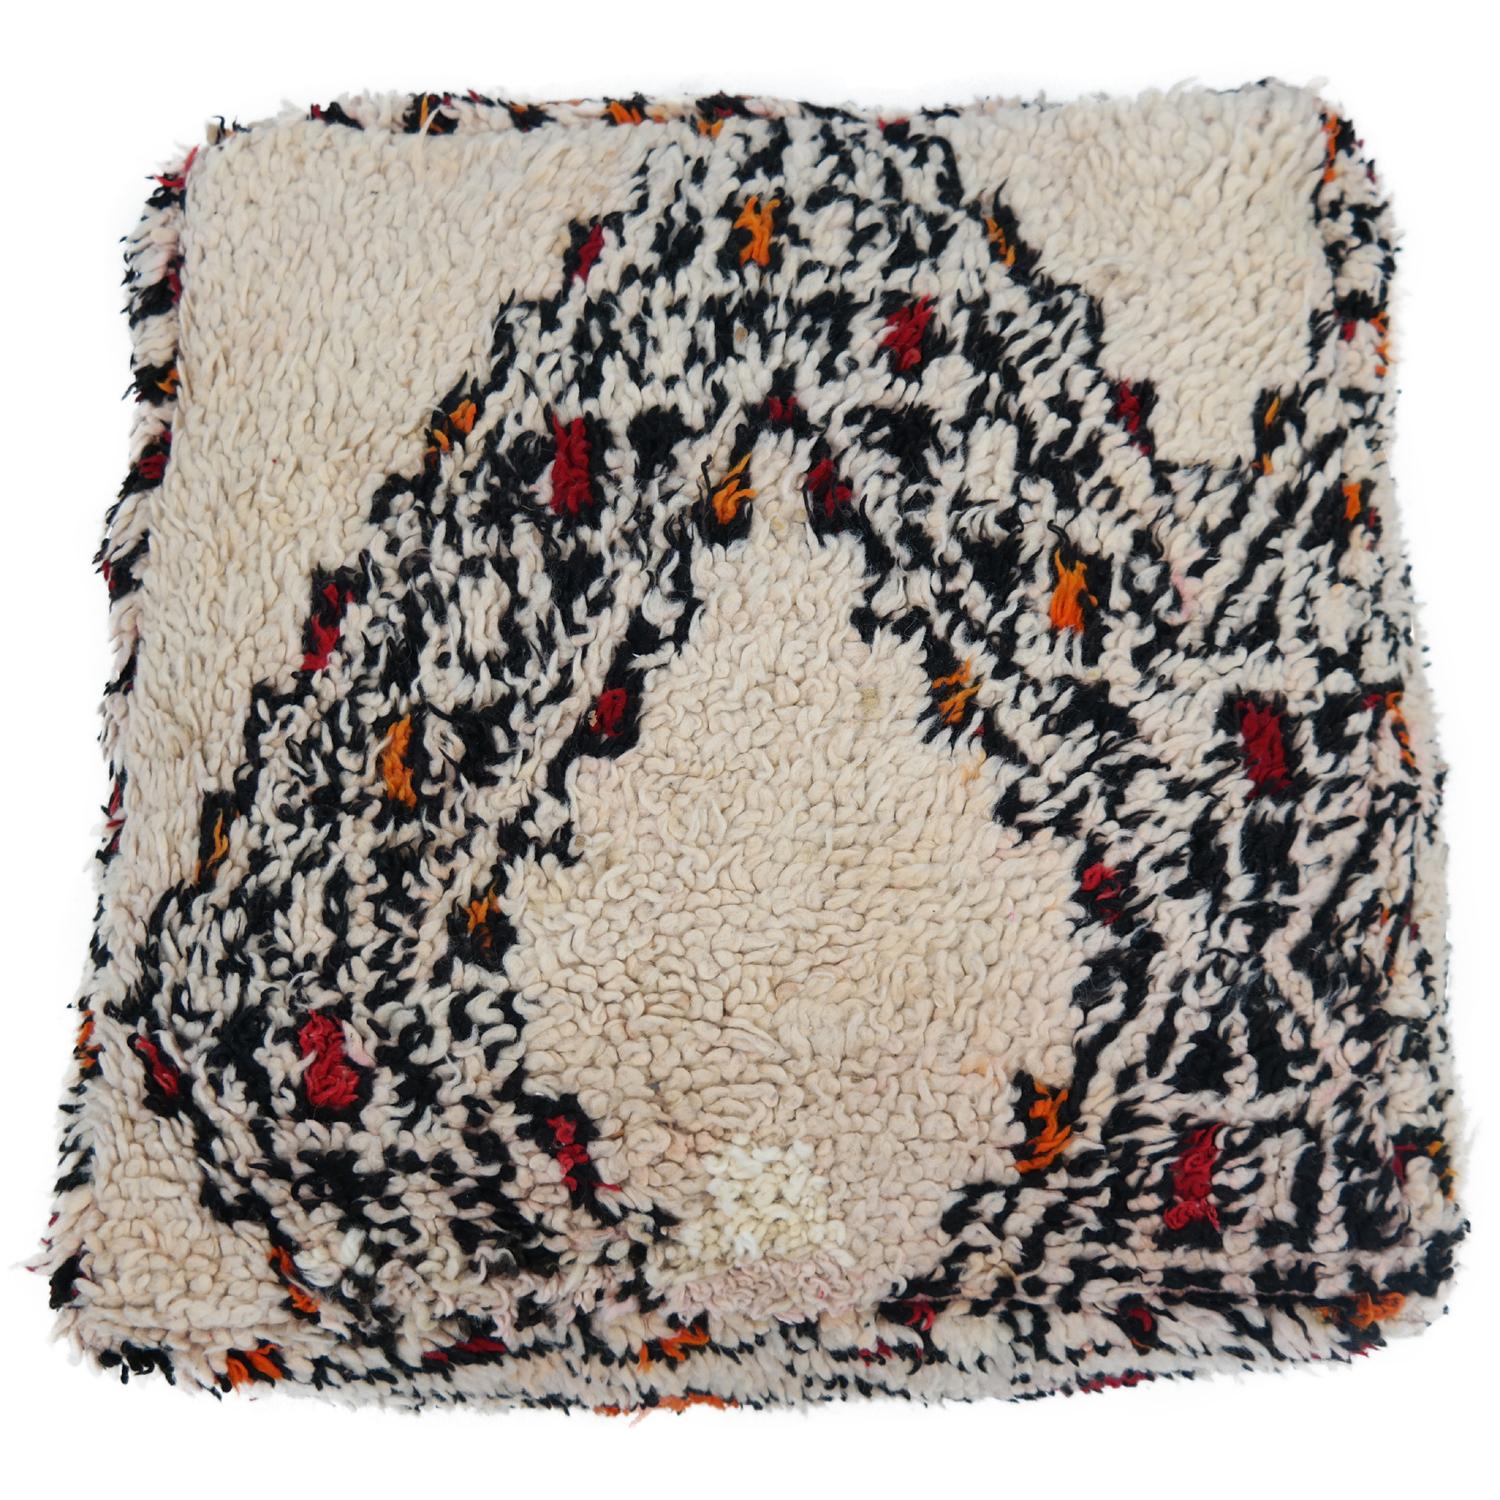 Make your space completely unique with this gorgeous pouf, custom made from a beautiful authentic circa 40 years old Beni Ourain rug. Adding a cozy and sophisticated touch to your space will be easy with this one-of-a-kind pouf. It is perfect for